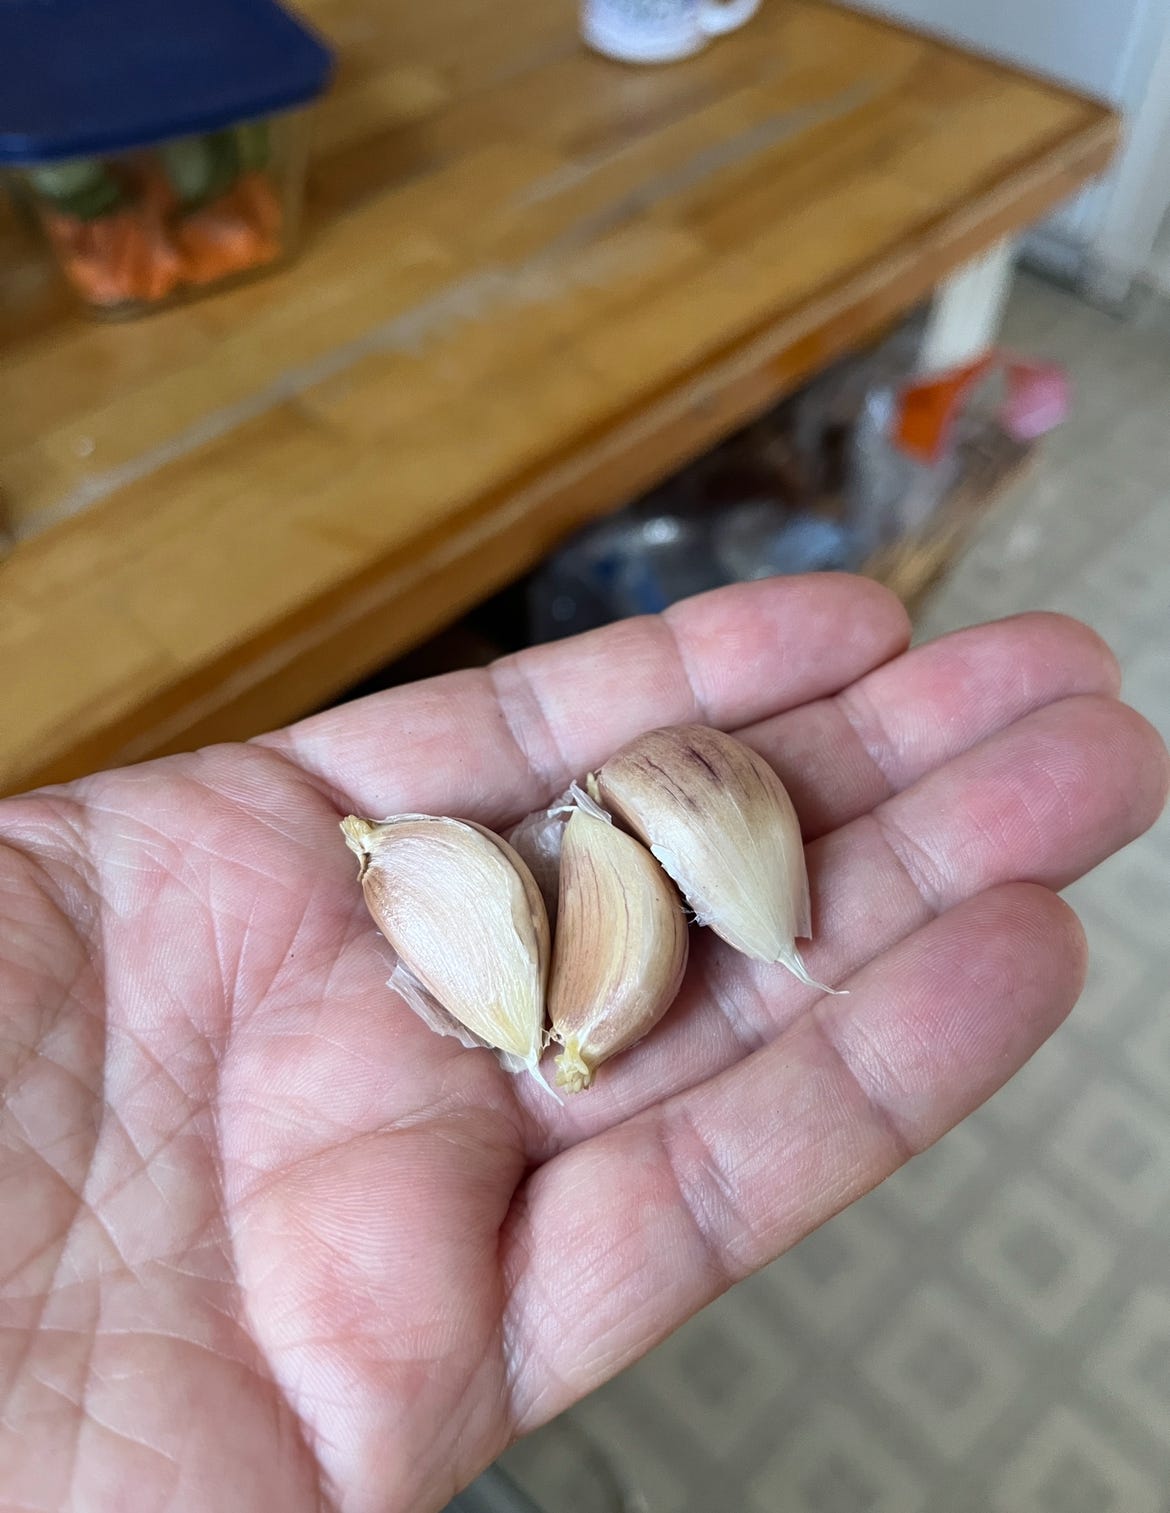 Three cloves of garlic in the palm of my hand.